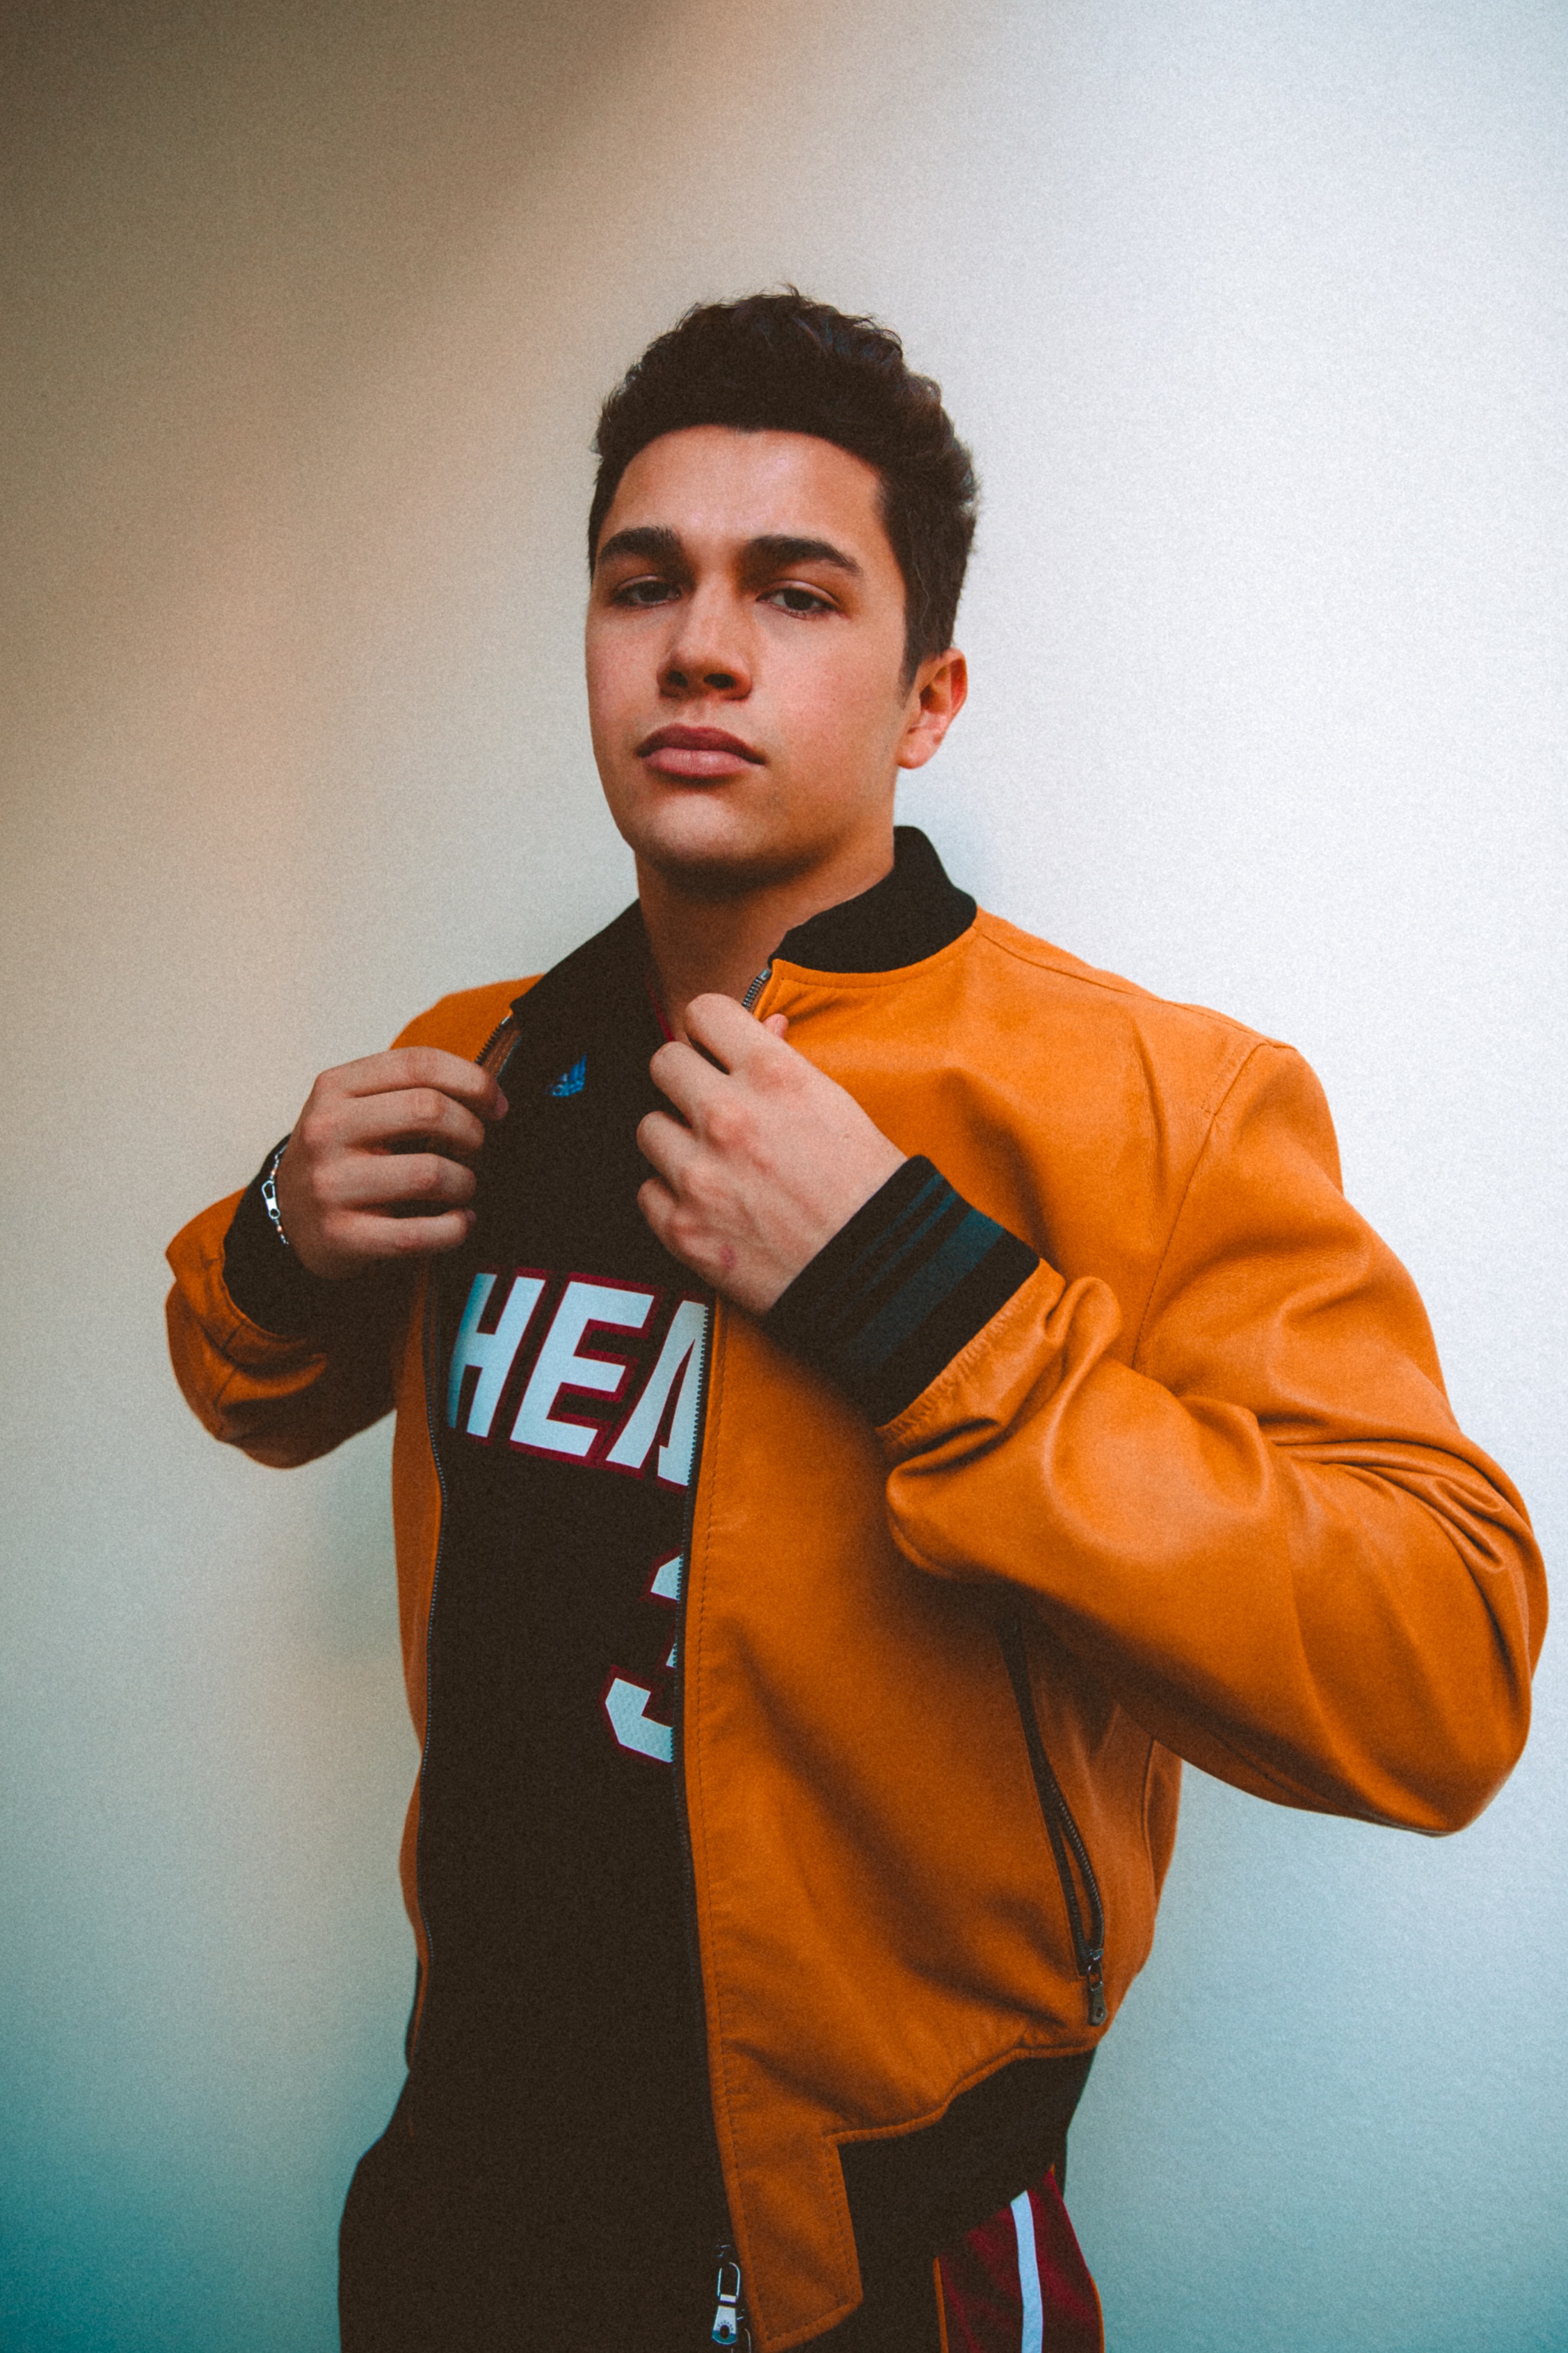 Singer Austin Mahone is Ready to Start His Tour in South Florida - Boca Raton's Most ...2730 x 4096